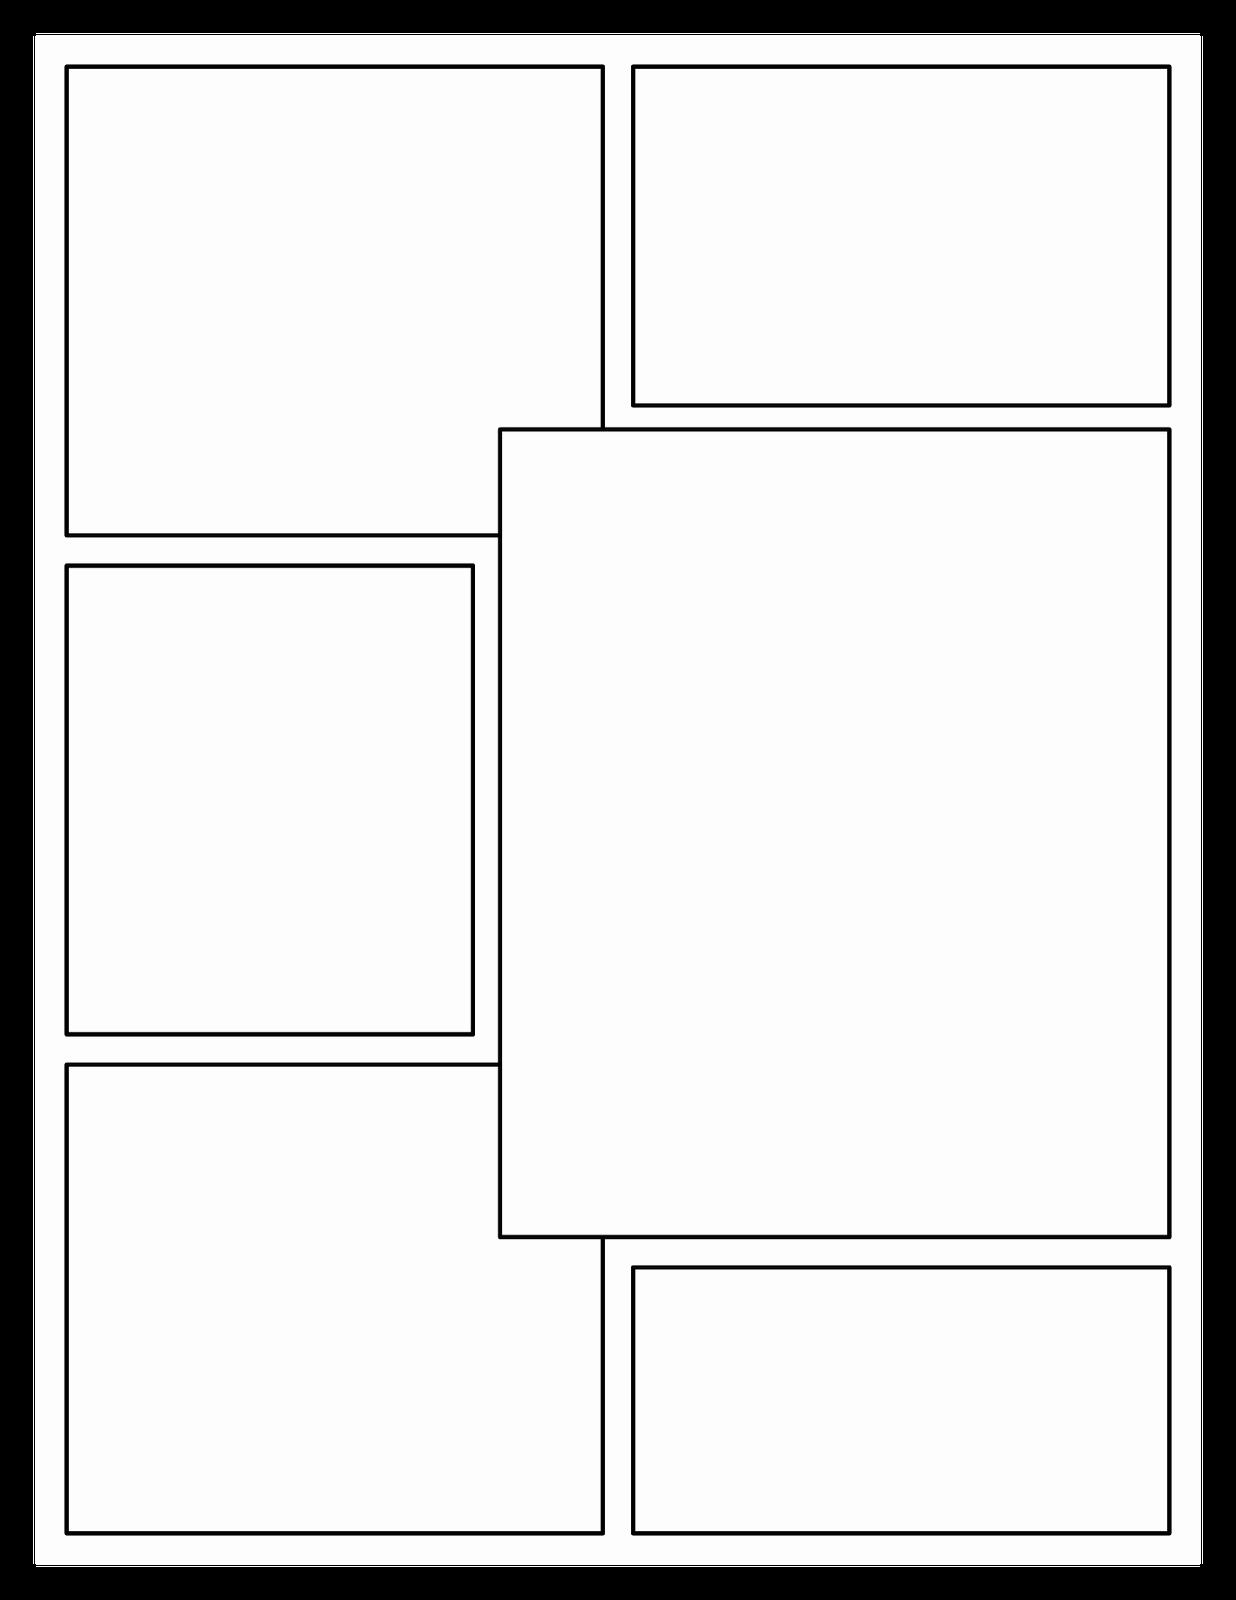 Comic Strip Template Awesome Mrs orman S Classroom Fering Choices for Your Readers